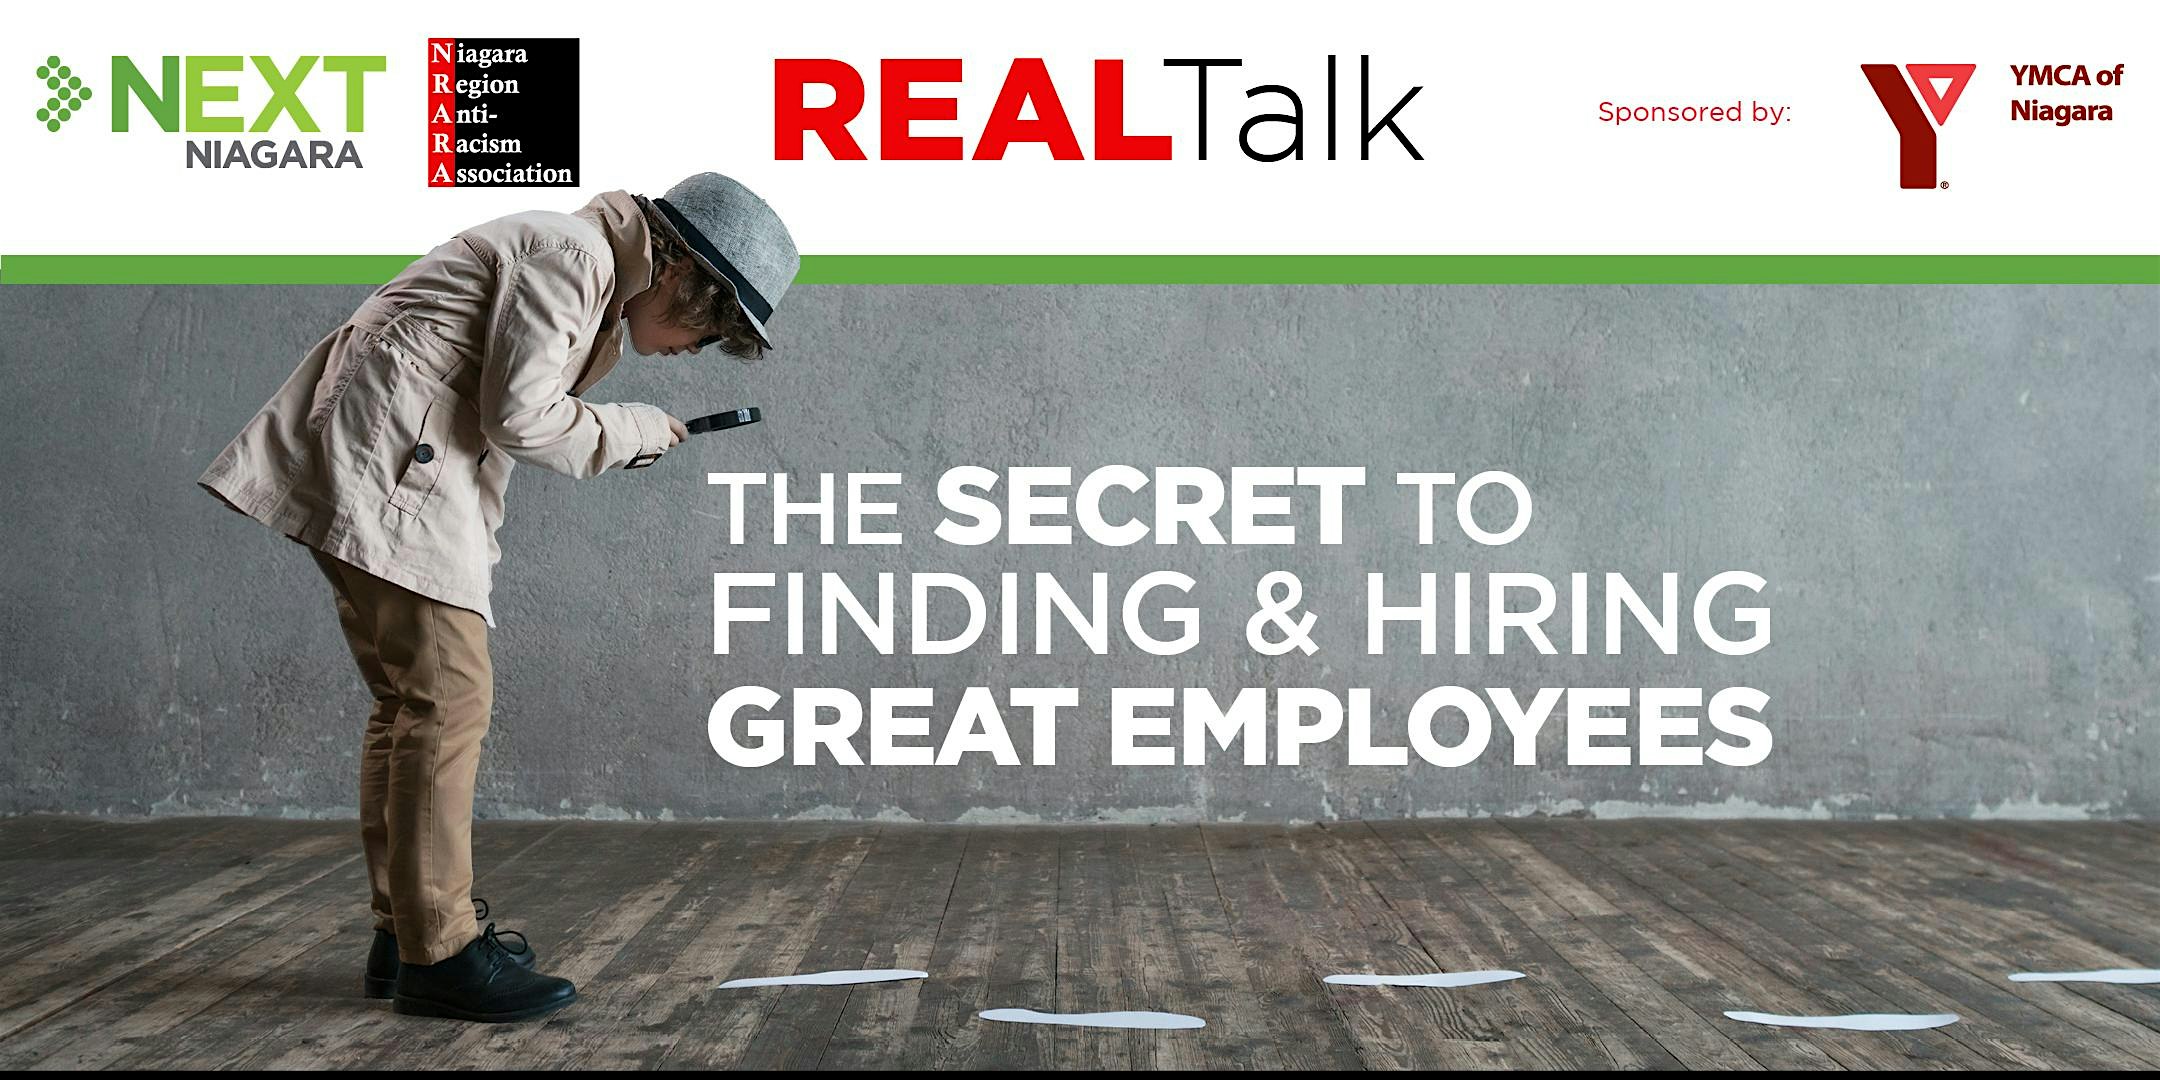 REALTalk: The Secret to Hiring Great Employees